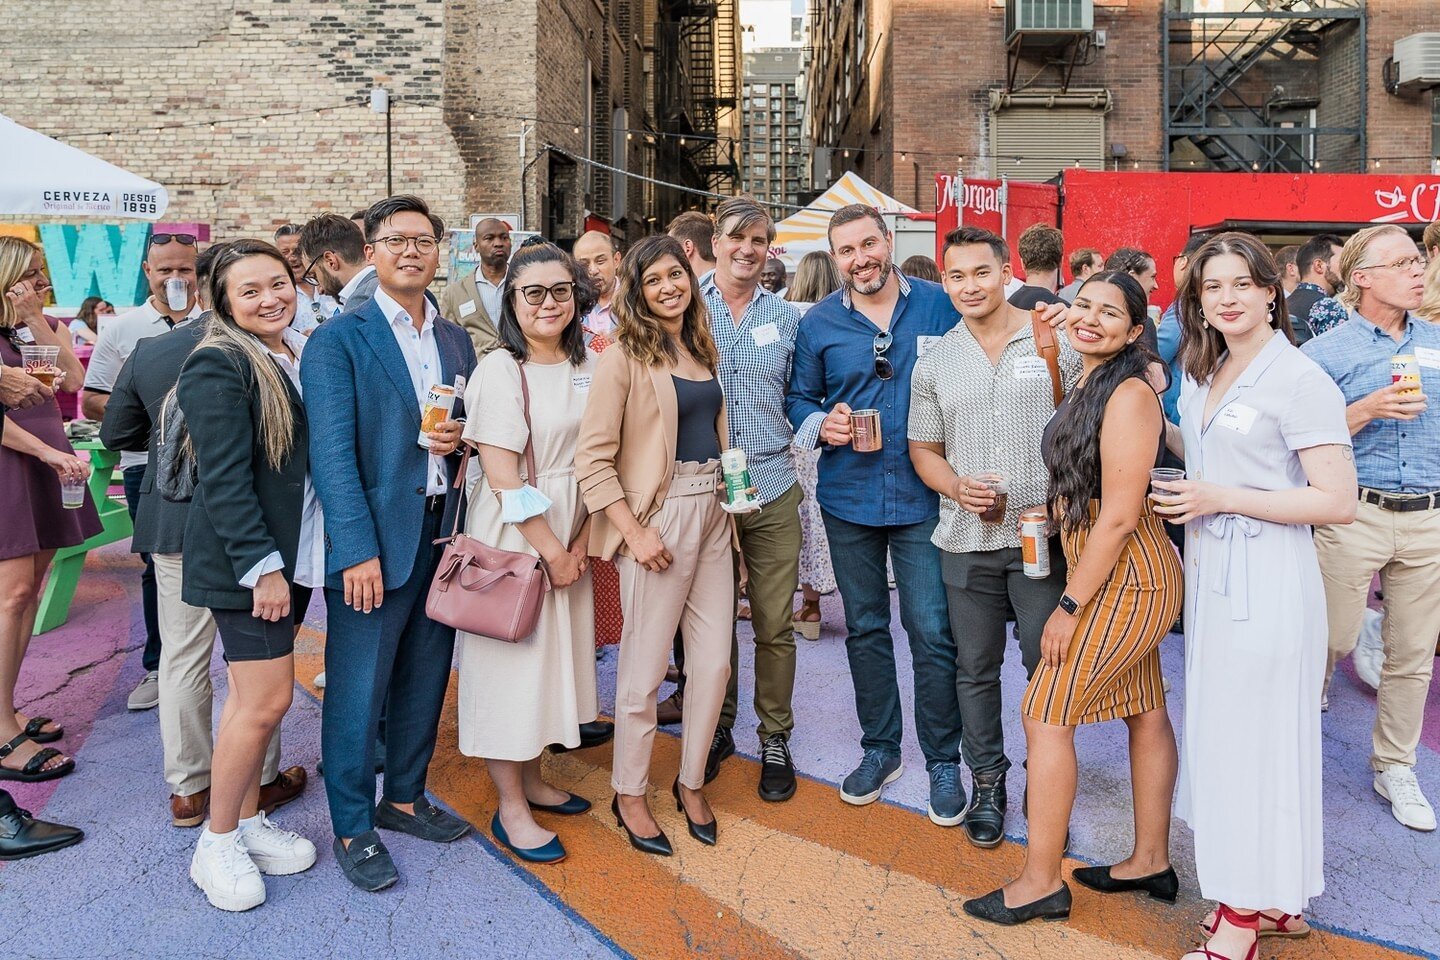 Last year, the ULI Toronto Summer Social became the talk of the real estate and development industries, bringing professionals together for an exceptional networking event. The expansive RendezViews patio, graciously hosted by The Fifth Social Club a